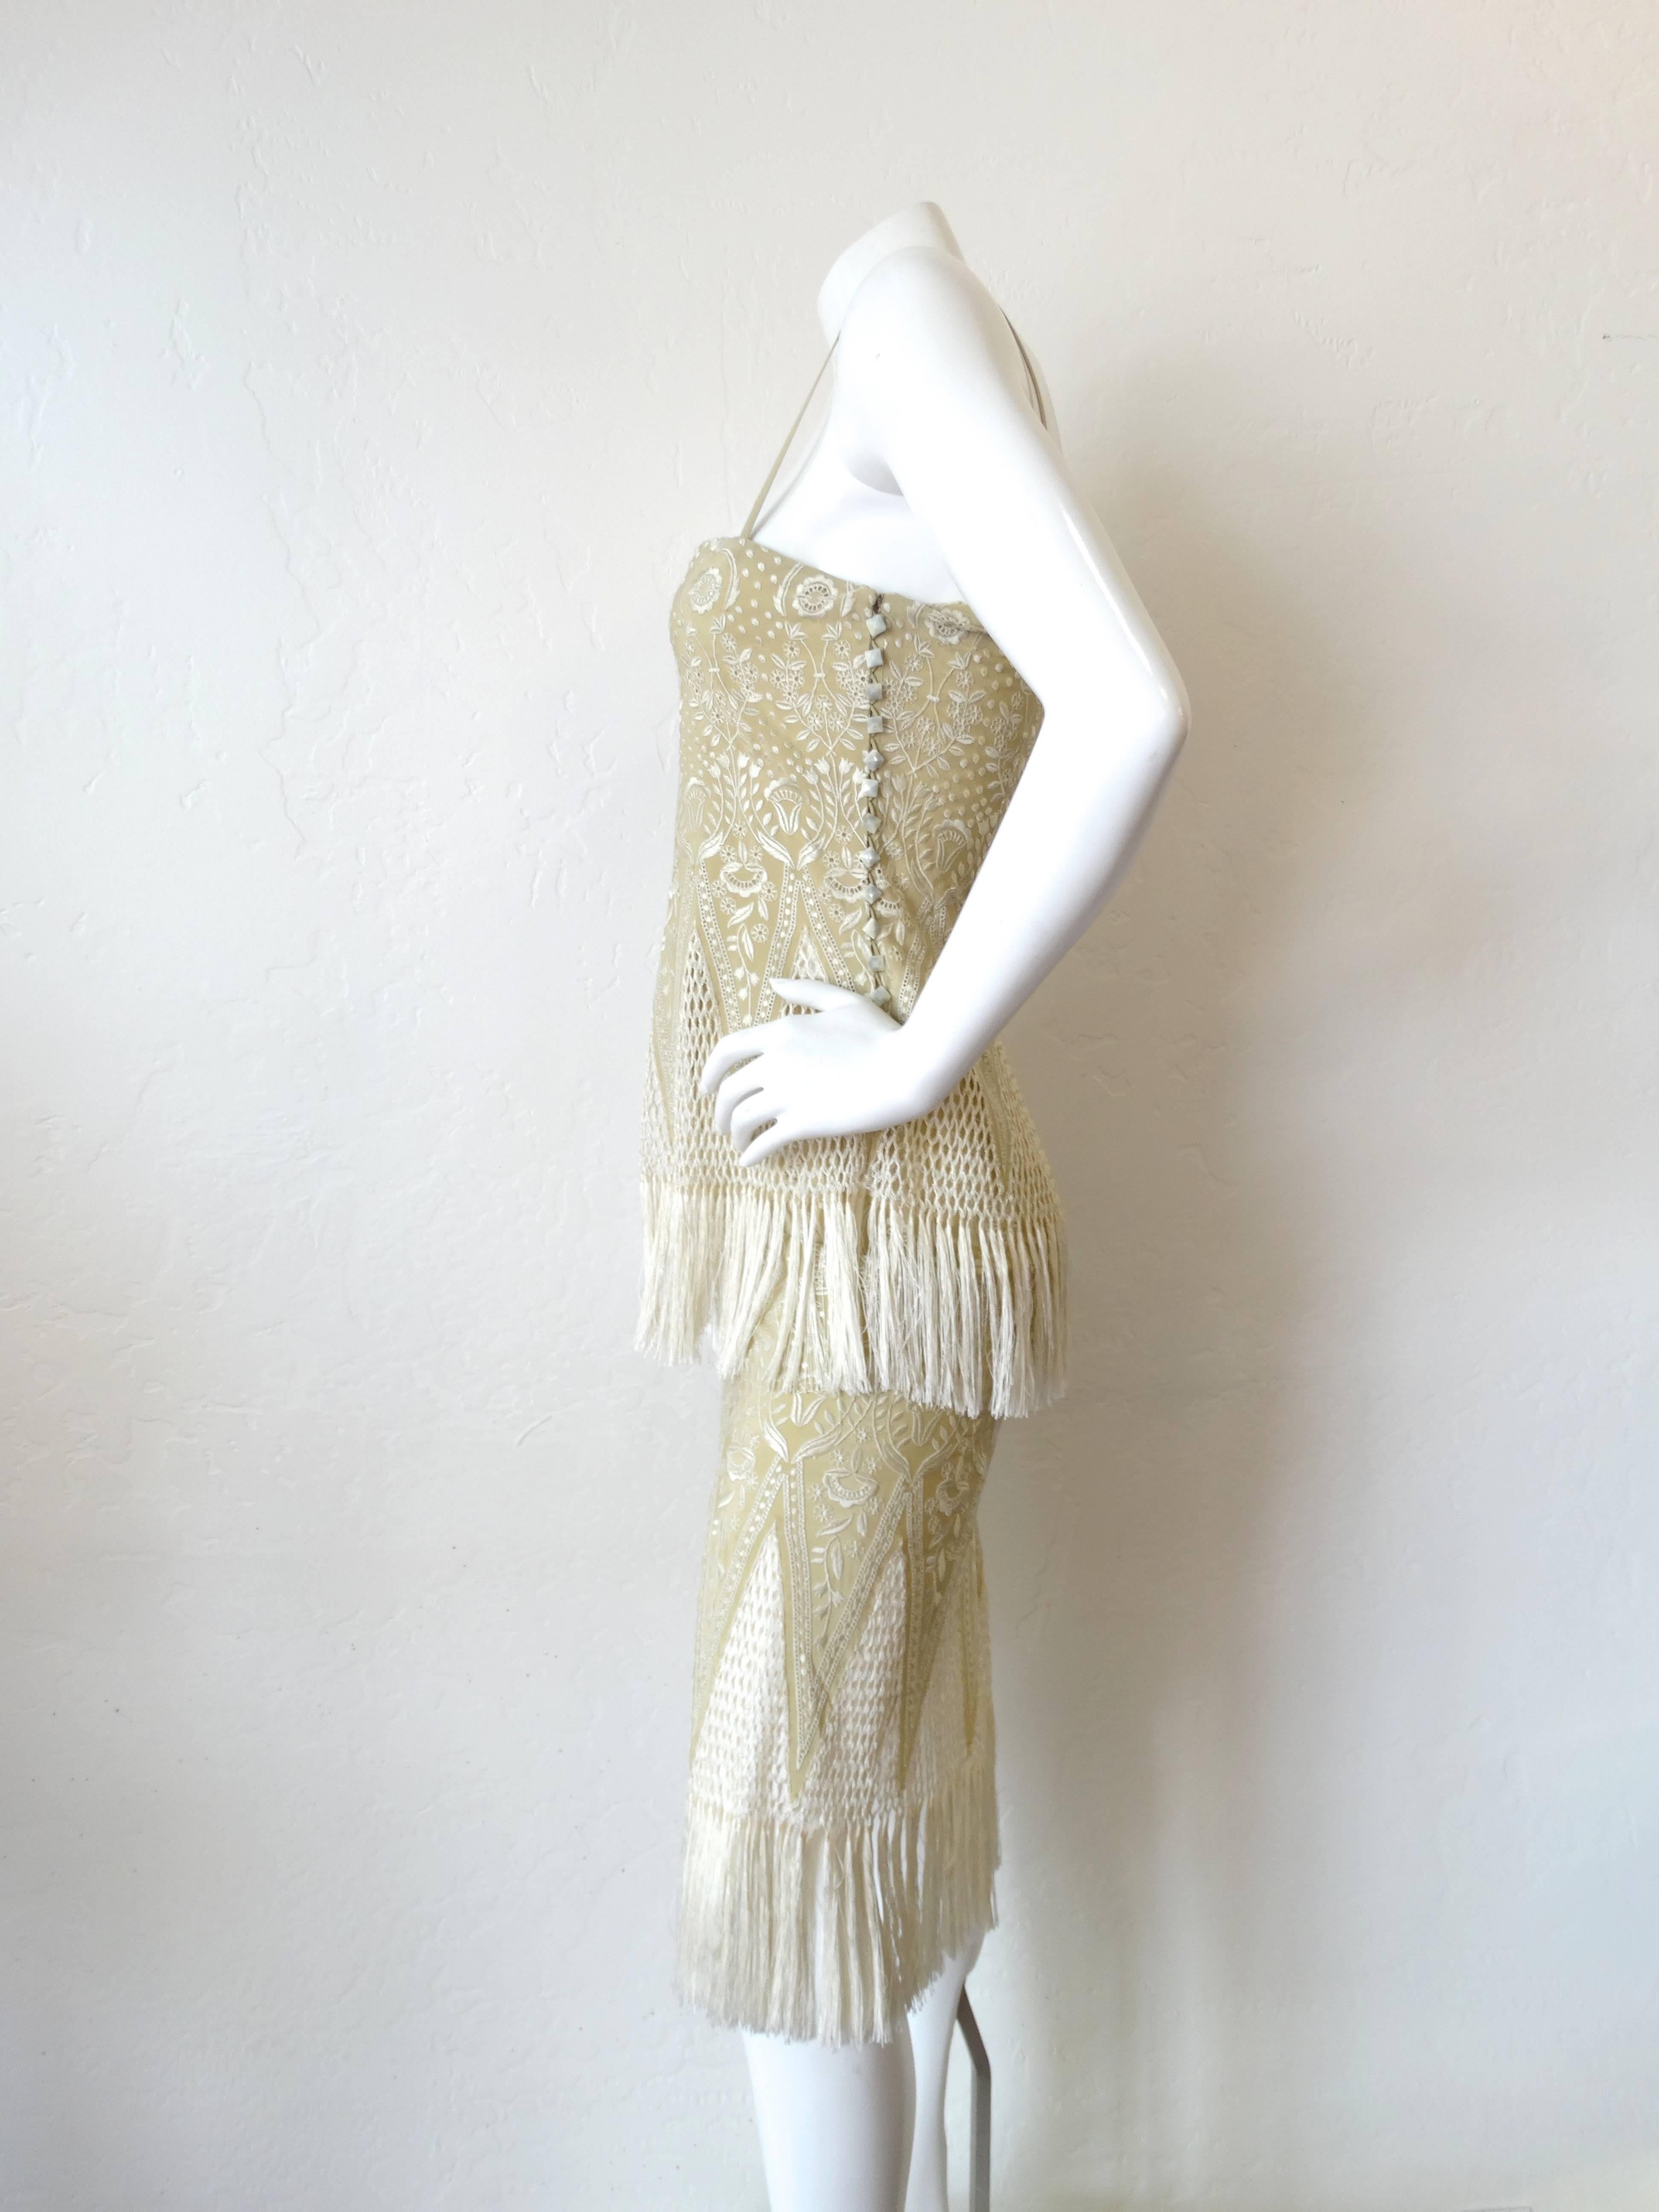 Straight from the 1970s- this Chloe piece is Karl Lagerfeld era goodness! Incredible be-fringed tank with dainty spaghetti straps. Faint tan color with creamy botanical embroidery. Waist is slightly see through with the open weave crochet pattern.